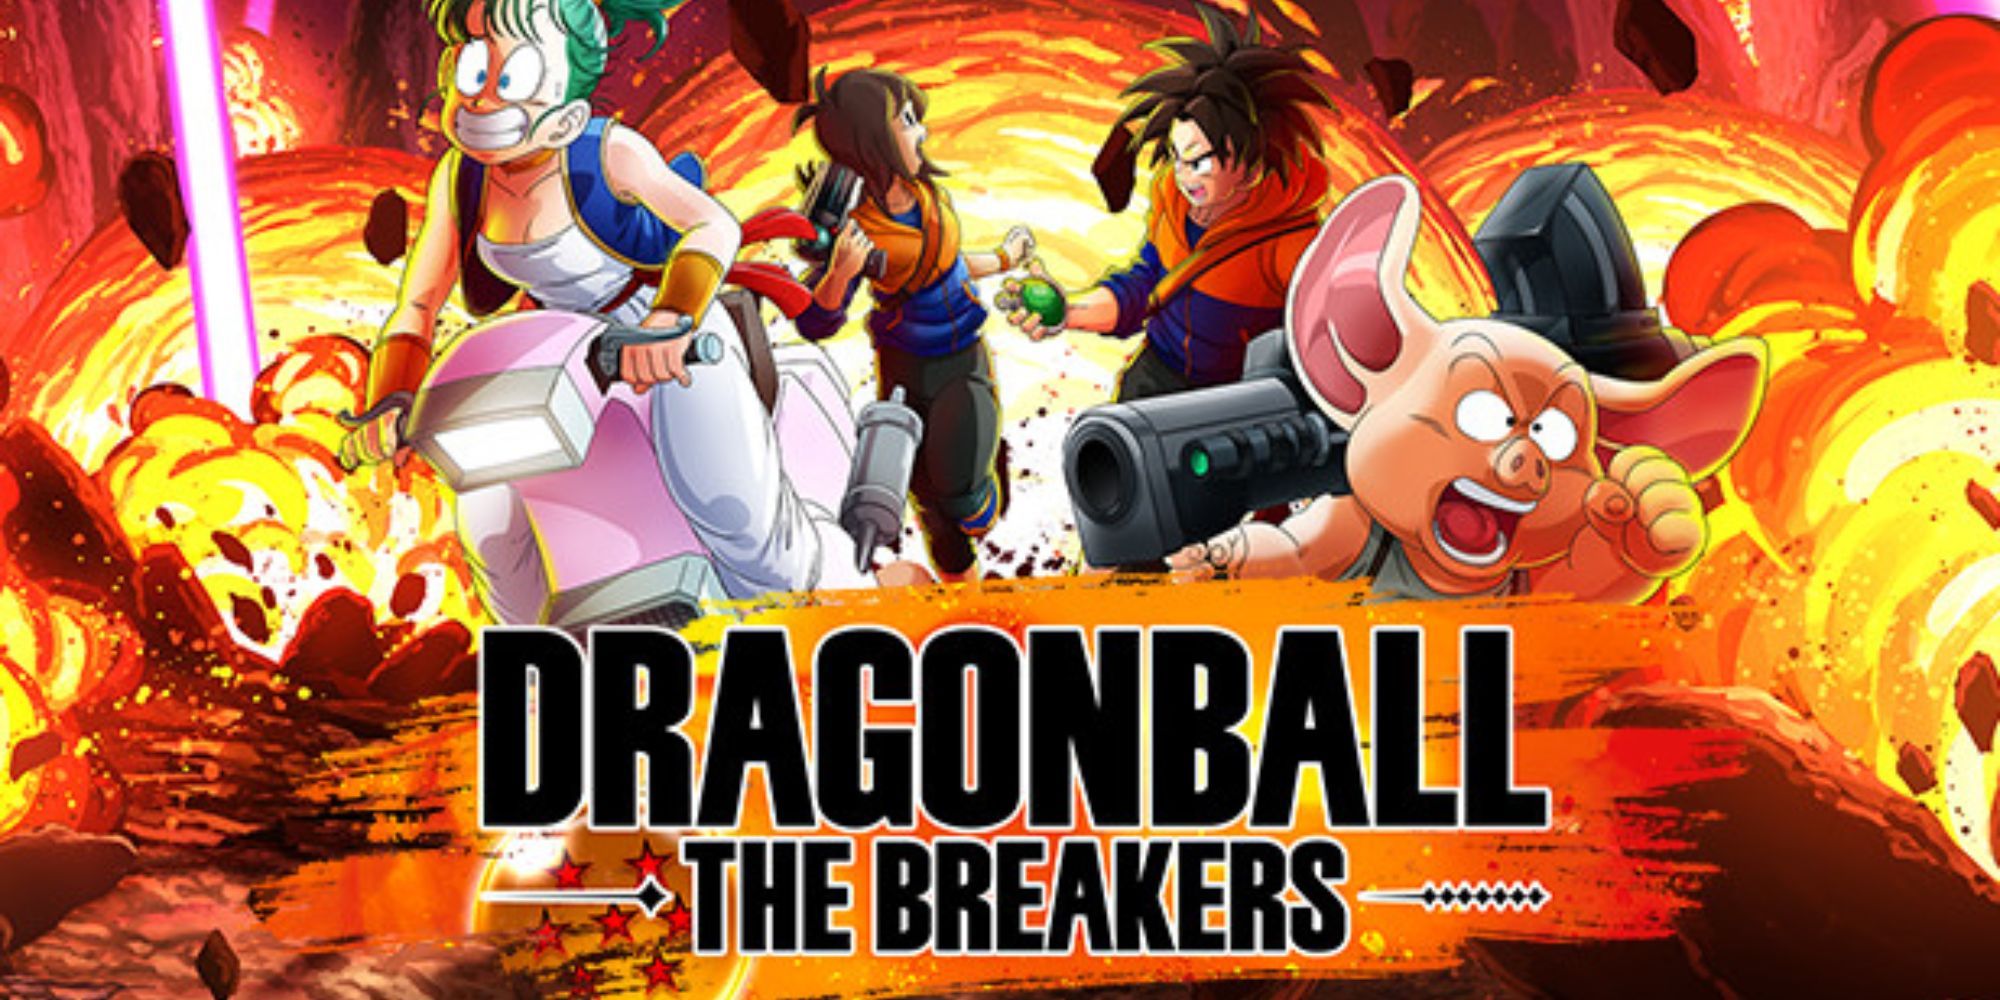 Raiders and Survivors in Dragon Ball: The Breakers